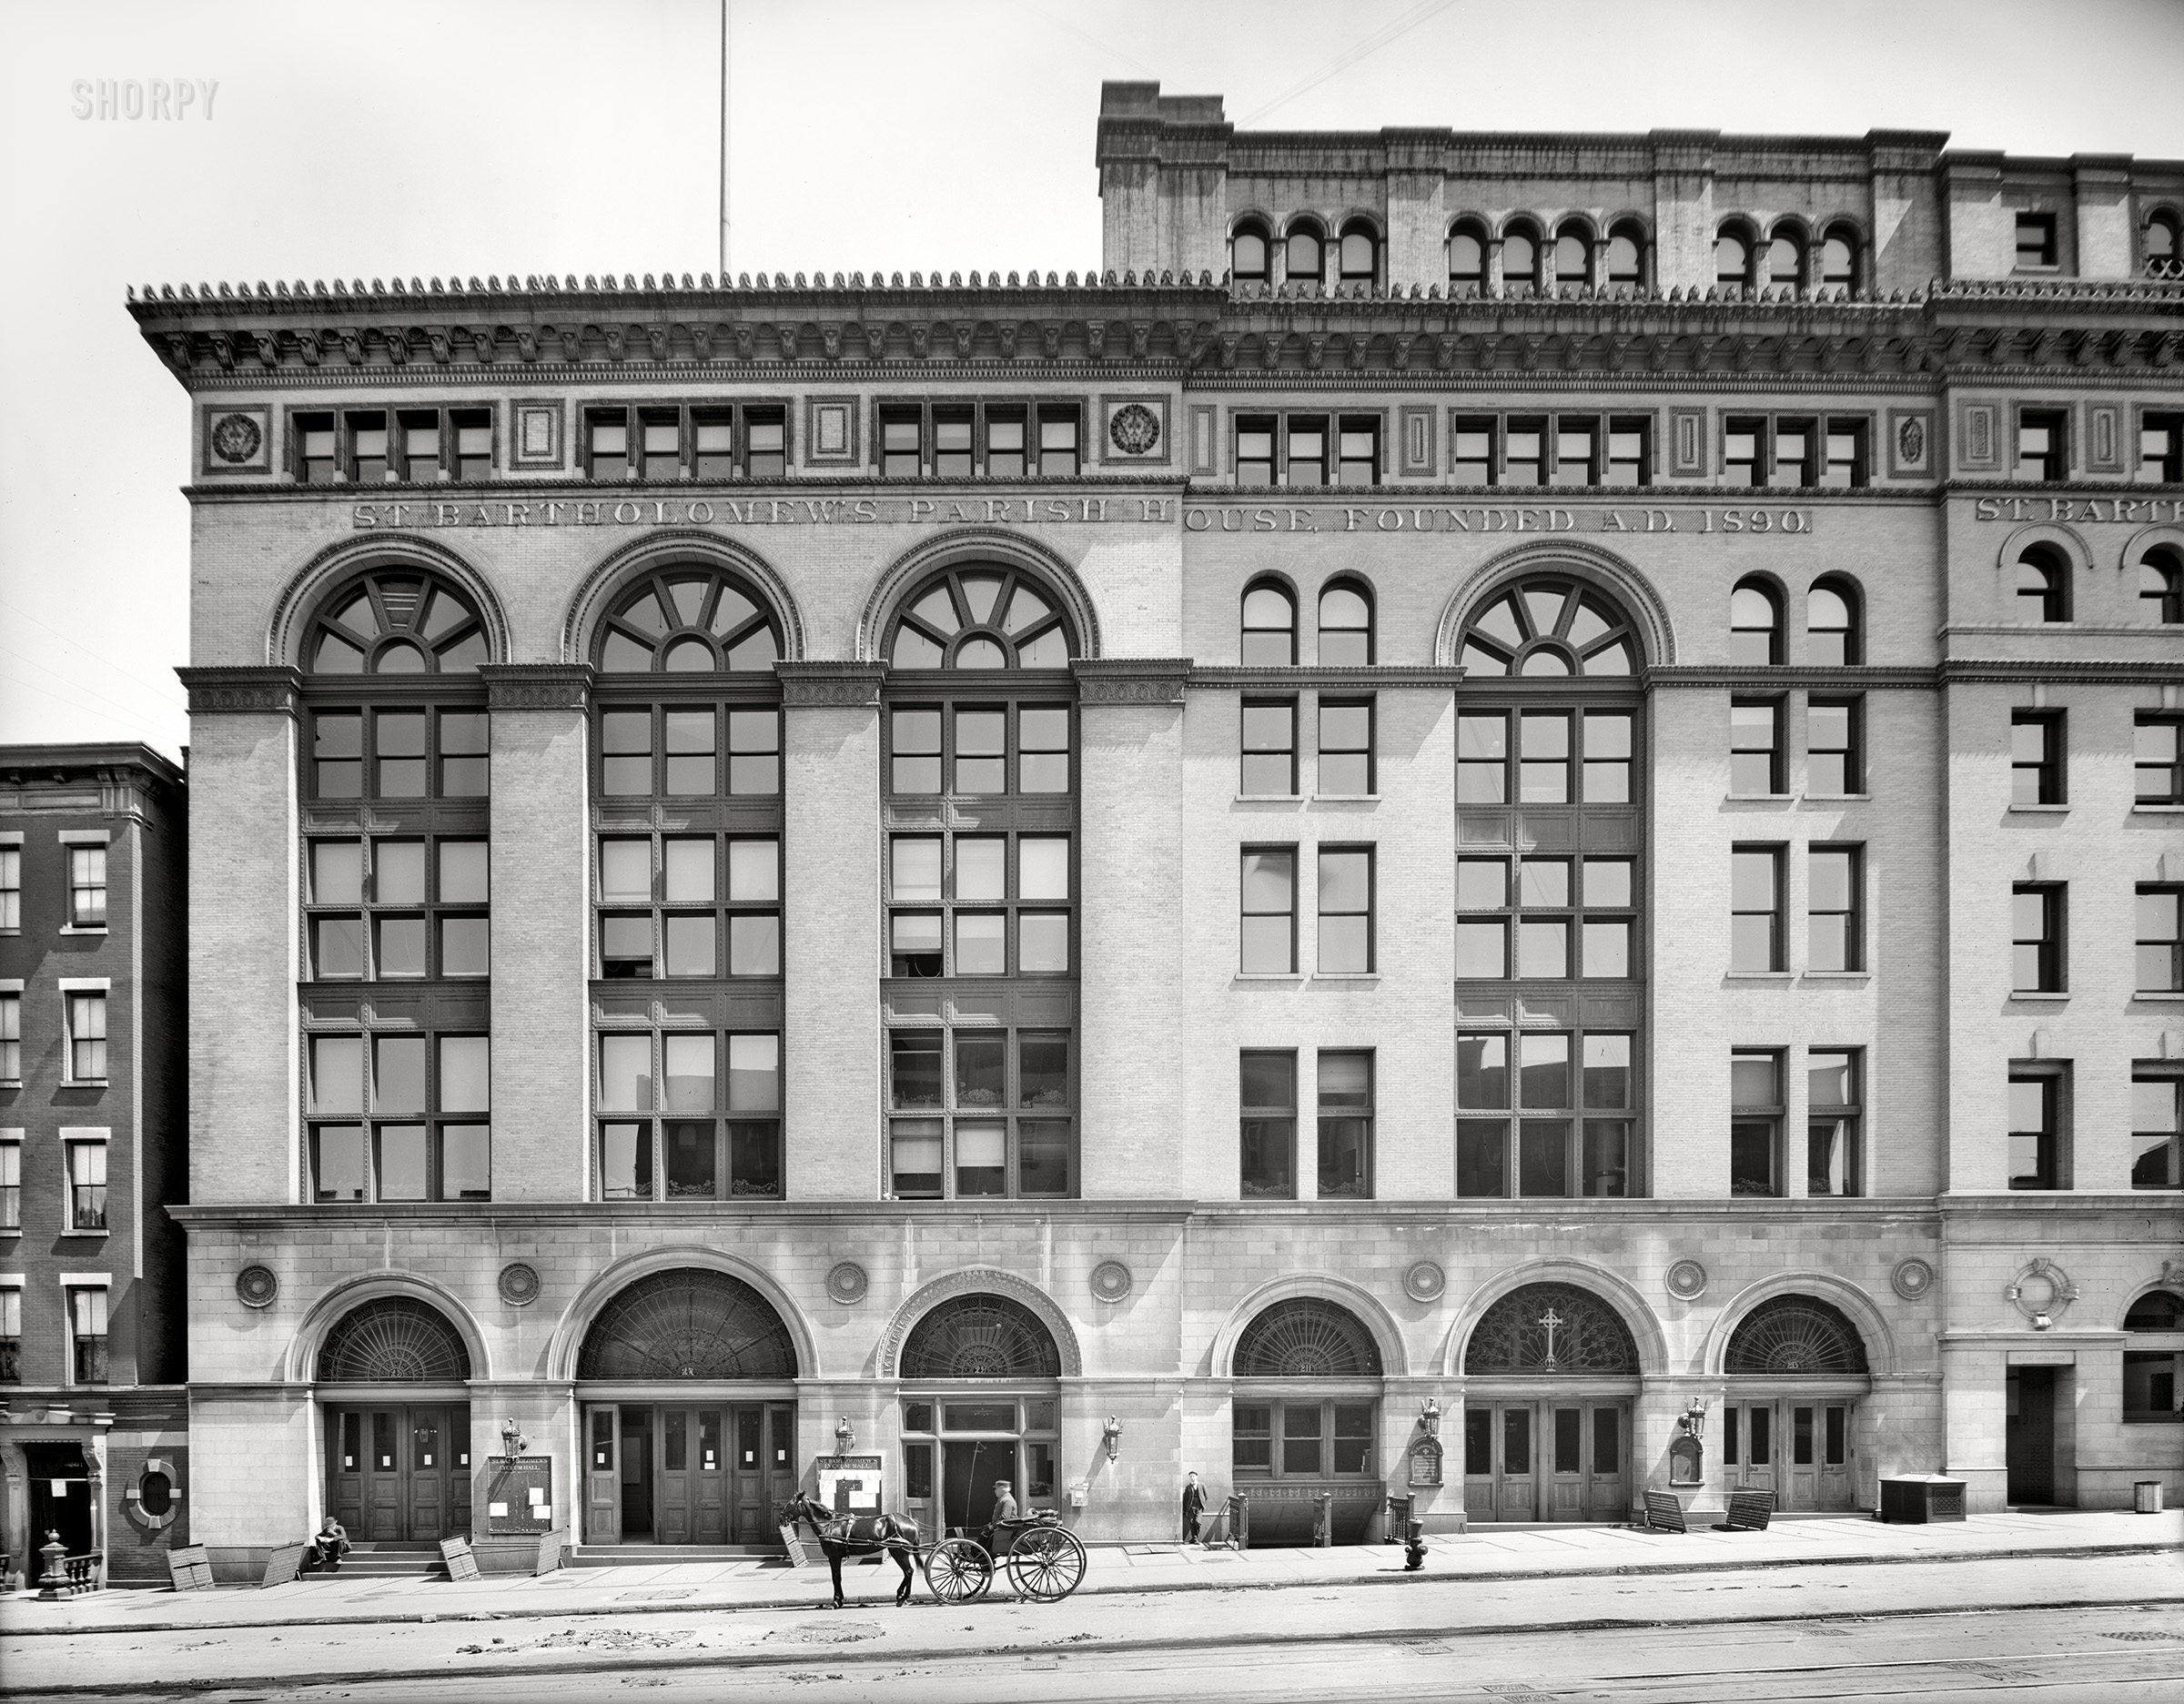 New York circa 1905. "St. Bartholomew's Church parish house, East 42nd Street." Previously seen here. 8x10 inch dry plate glass negative, Detroit Publishing Company. View full size.